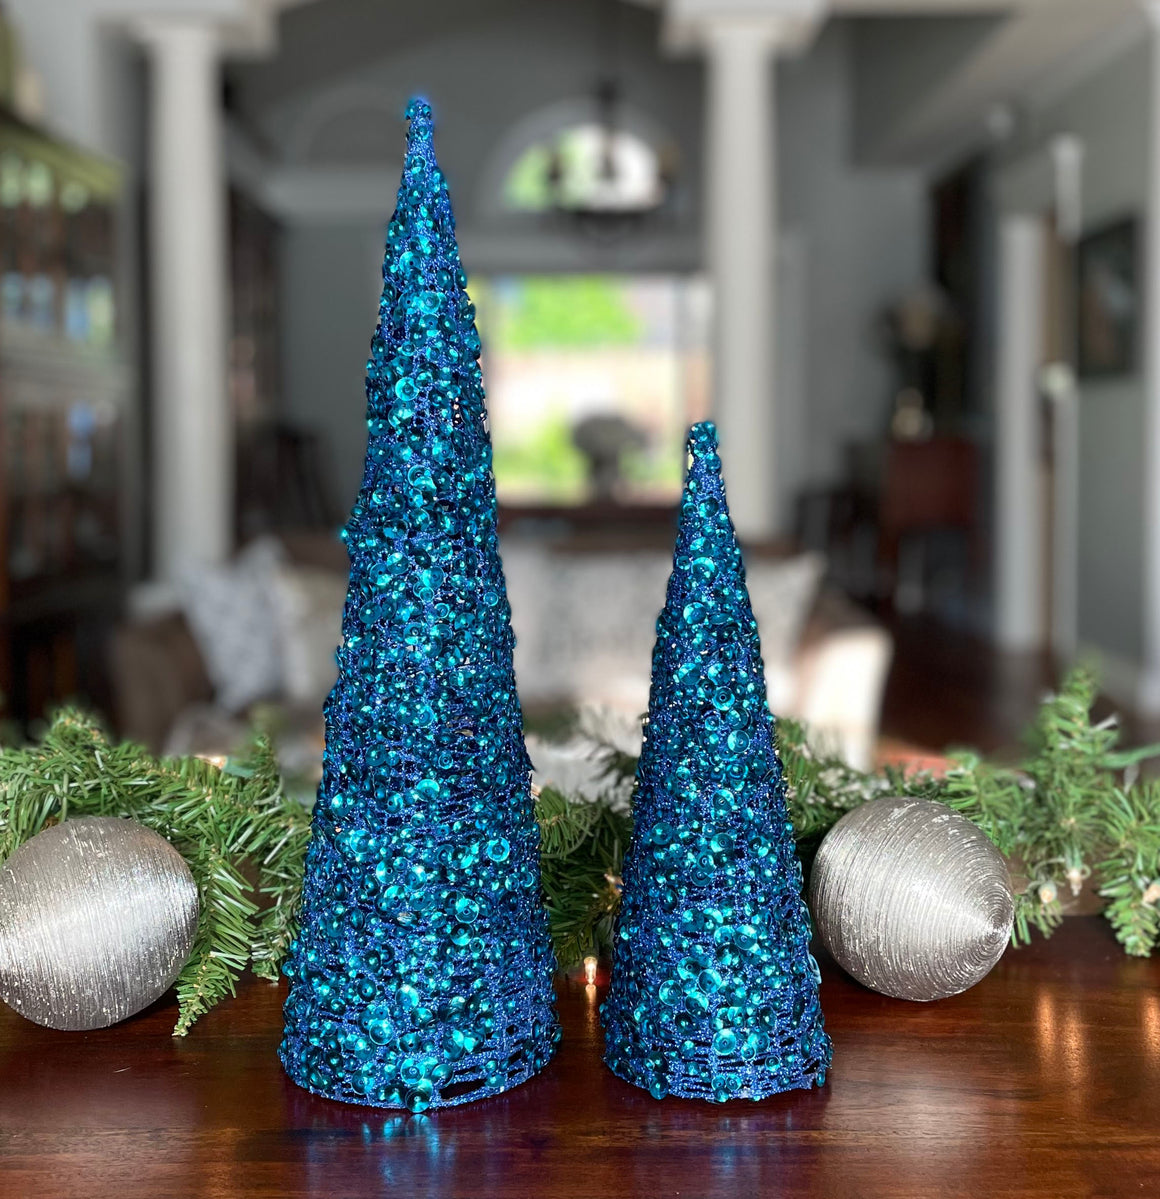 Set of 2 Sequined and Glittered Blue Christmas Cone Trees 12 Inches and 18 Inches High